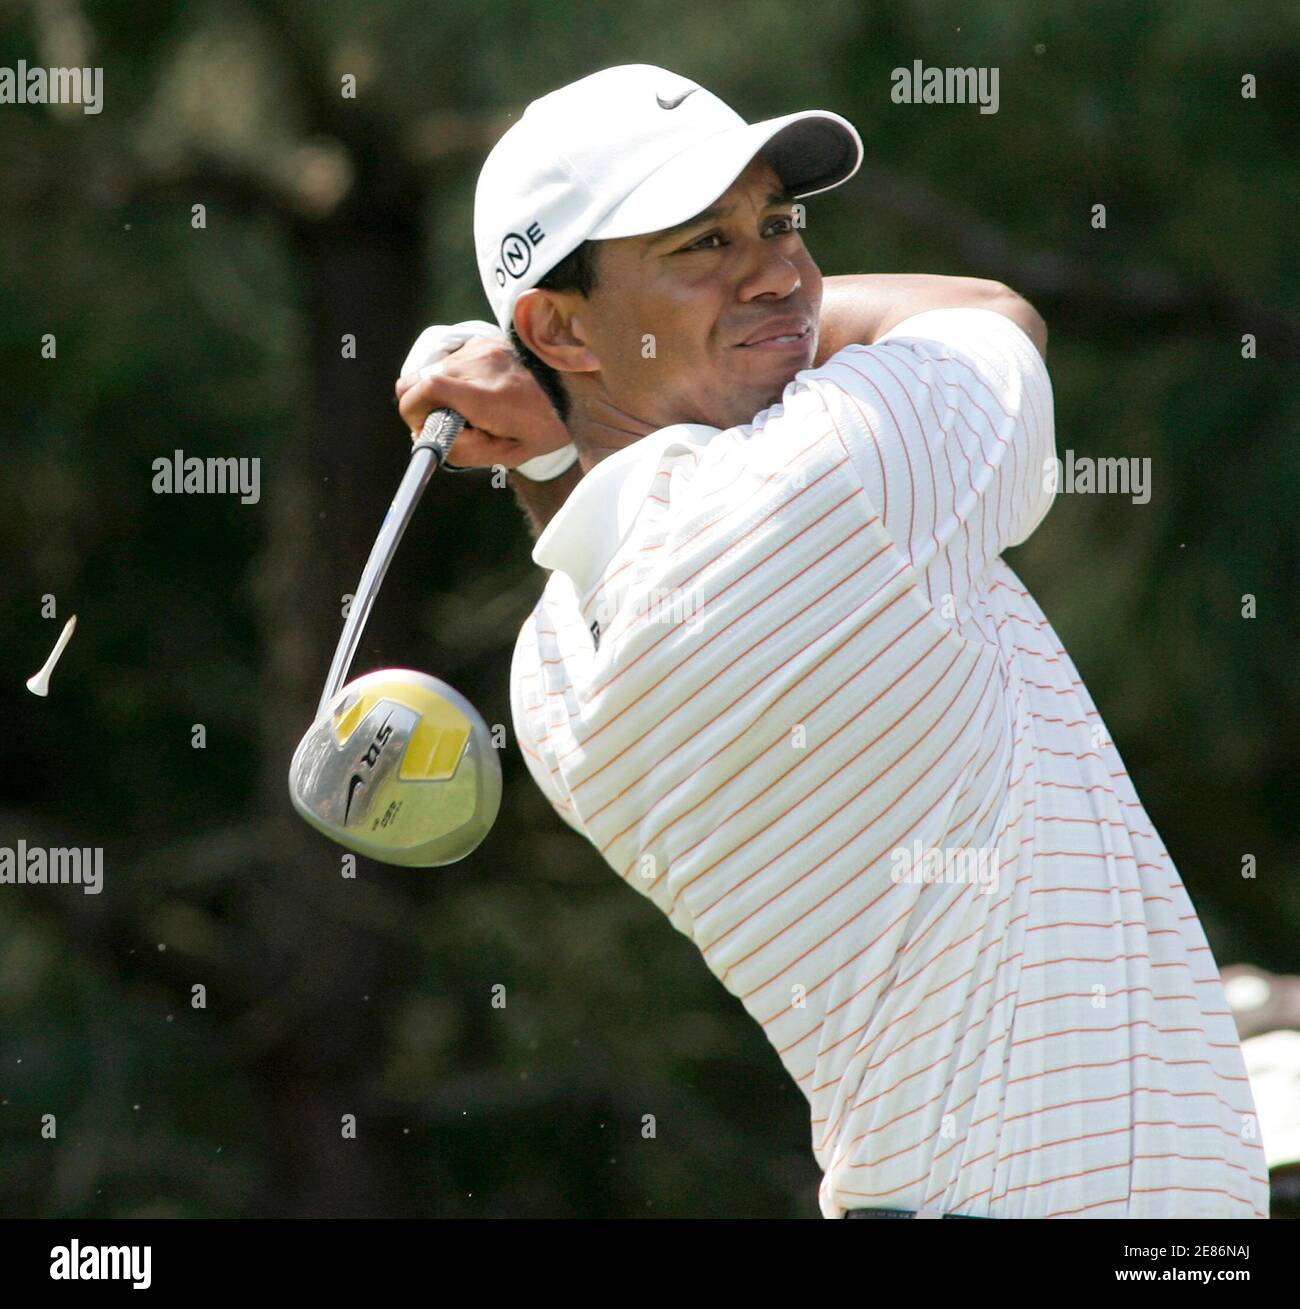 Tiger Woods tees off on the ninth hole during the third round of play at The Players Championship golf tournament in Ponte Vedra Beach, Florida May 12, 2007. REUTERS/Rick Fowler (UNITED STATES) Stock Photo